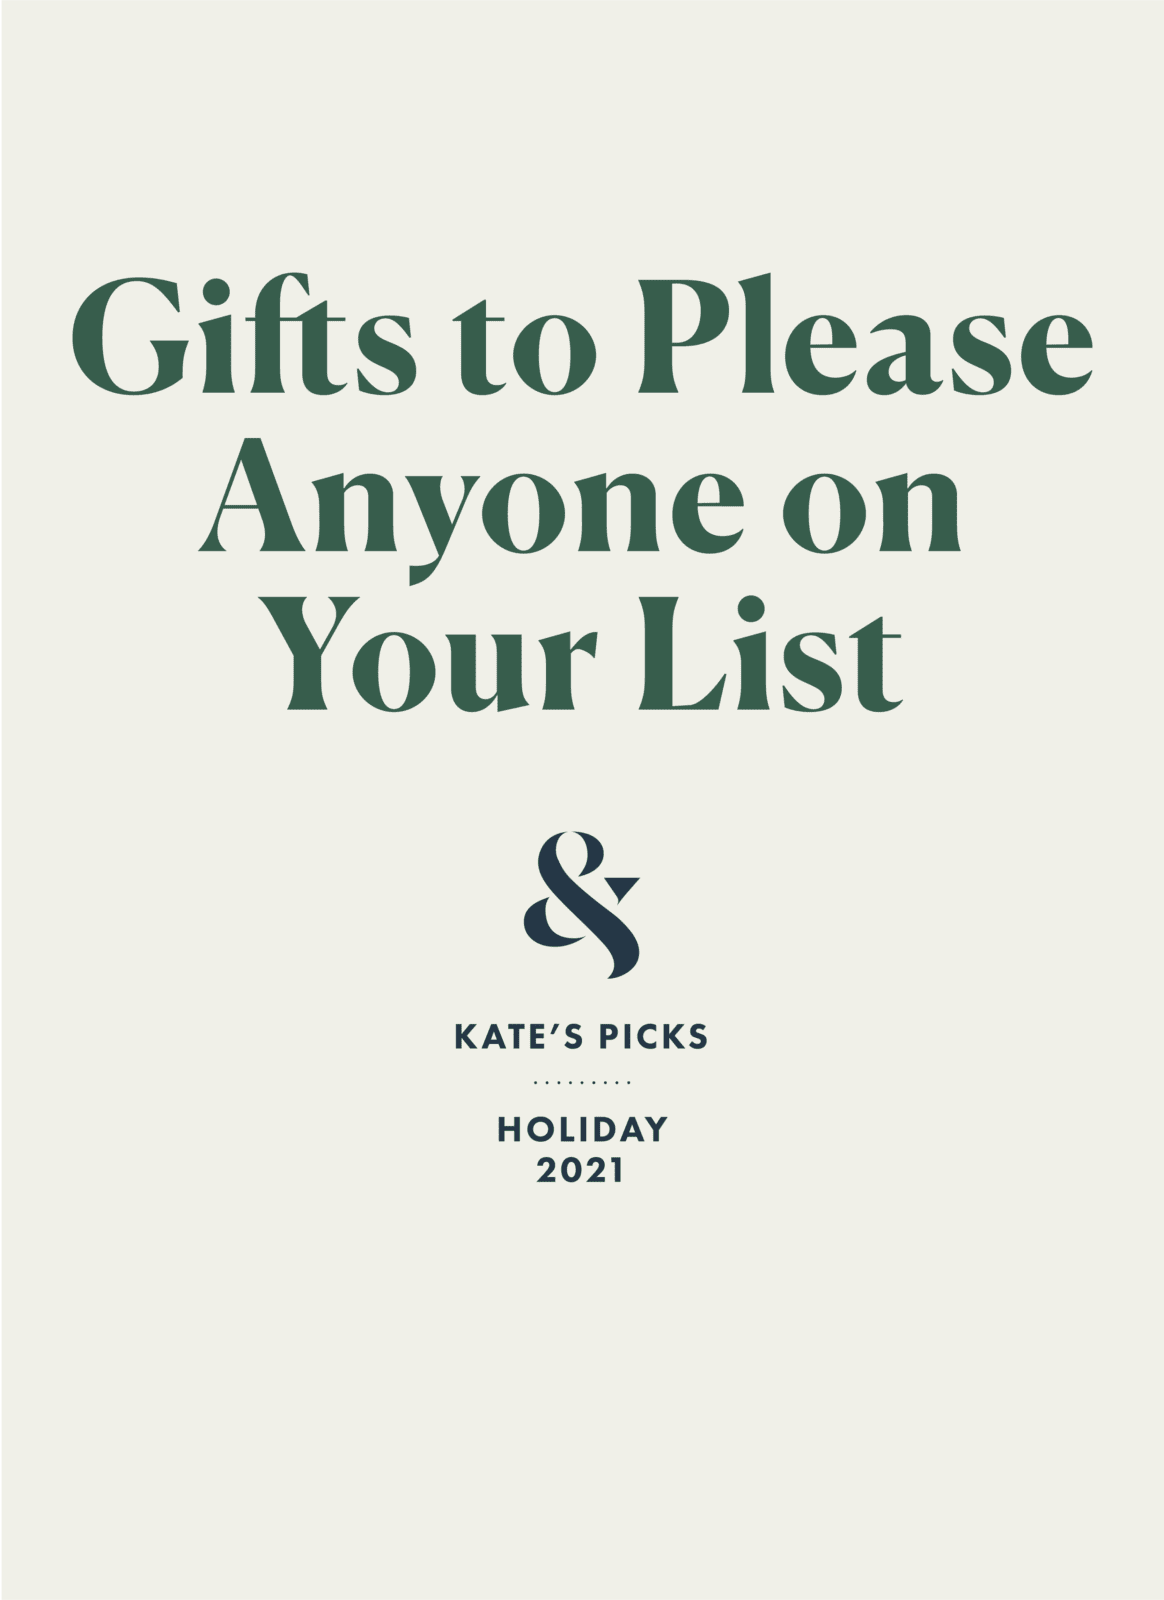 2021 Holiday Gift Guide: Gifts to Please Anyone on Your List | Wit & Delight